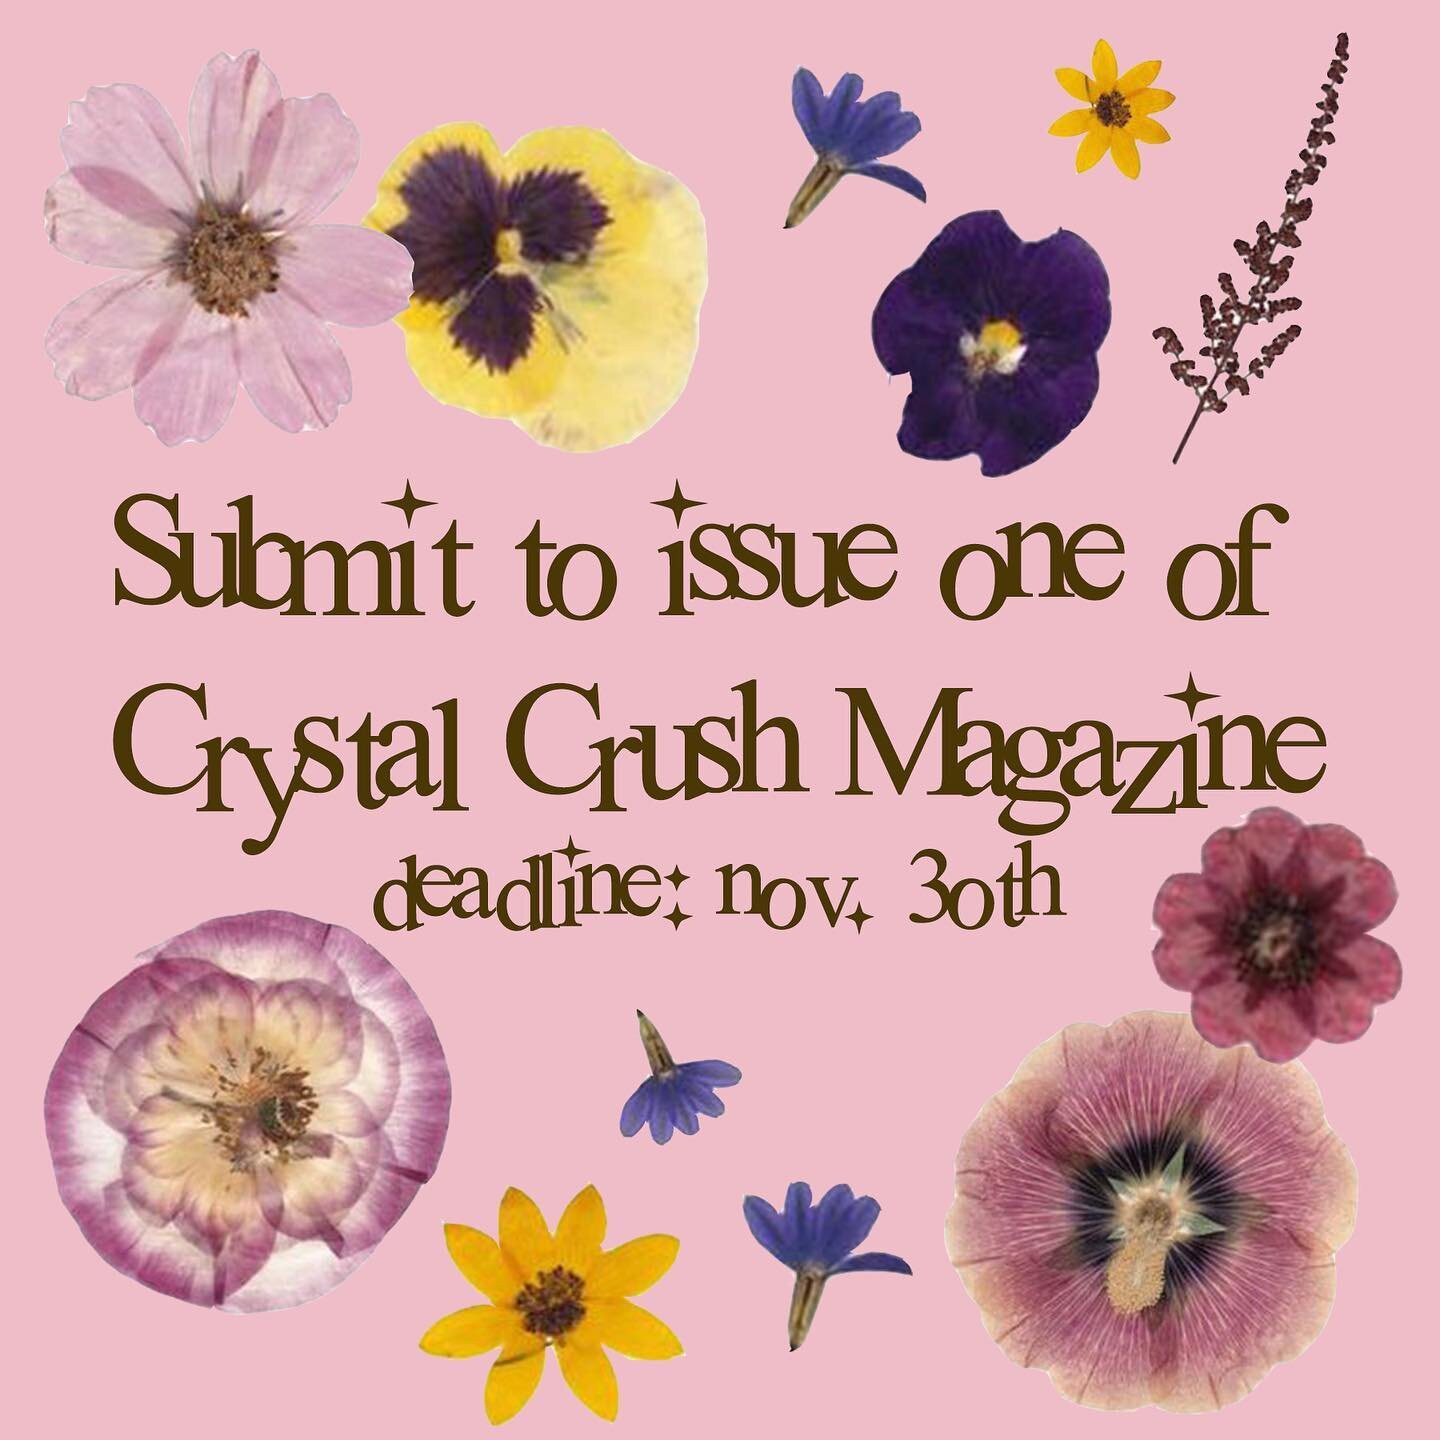 SUBMIT TO 01 OF CCM! NEW DEADLINE NOV. 30TH! link in our bio to submit and read more about the process xoxo 
💌🧸🔮🍓🌈💫🪐💐🍄🪴🦋🧚🏼&zwj;♀️
art by @witchabitcha 
#zine #magazine #submission #zinesubmissions #photographysubmissions #photography #po